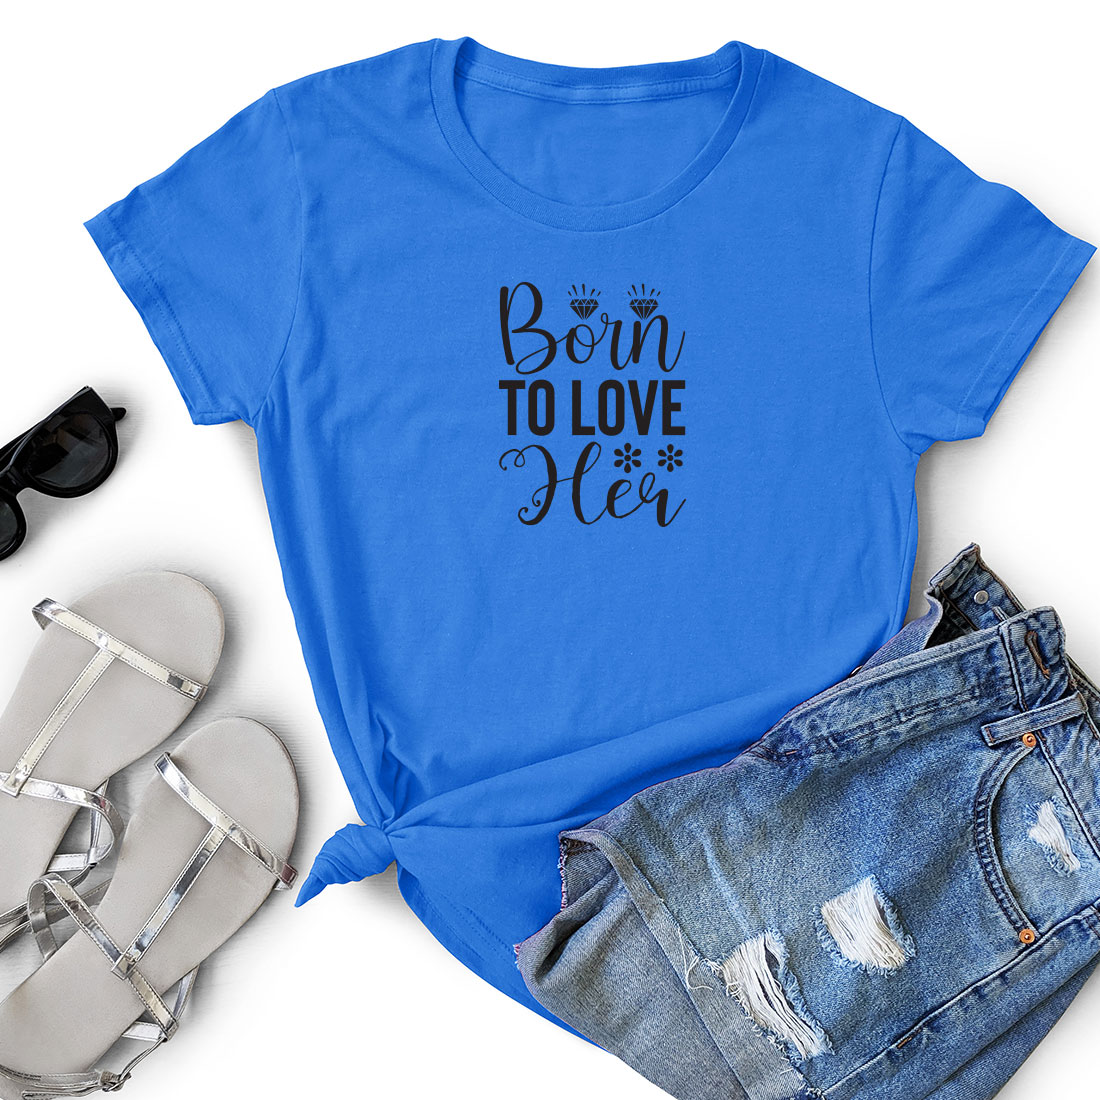 T - shirt that says born to love her next to a pair of shorts.